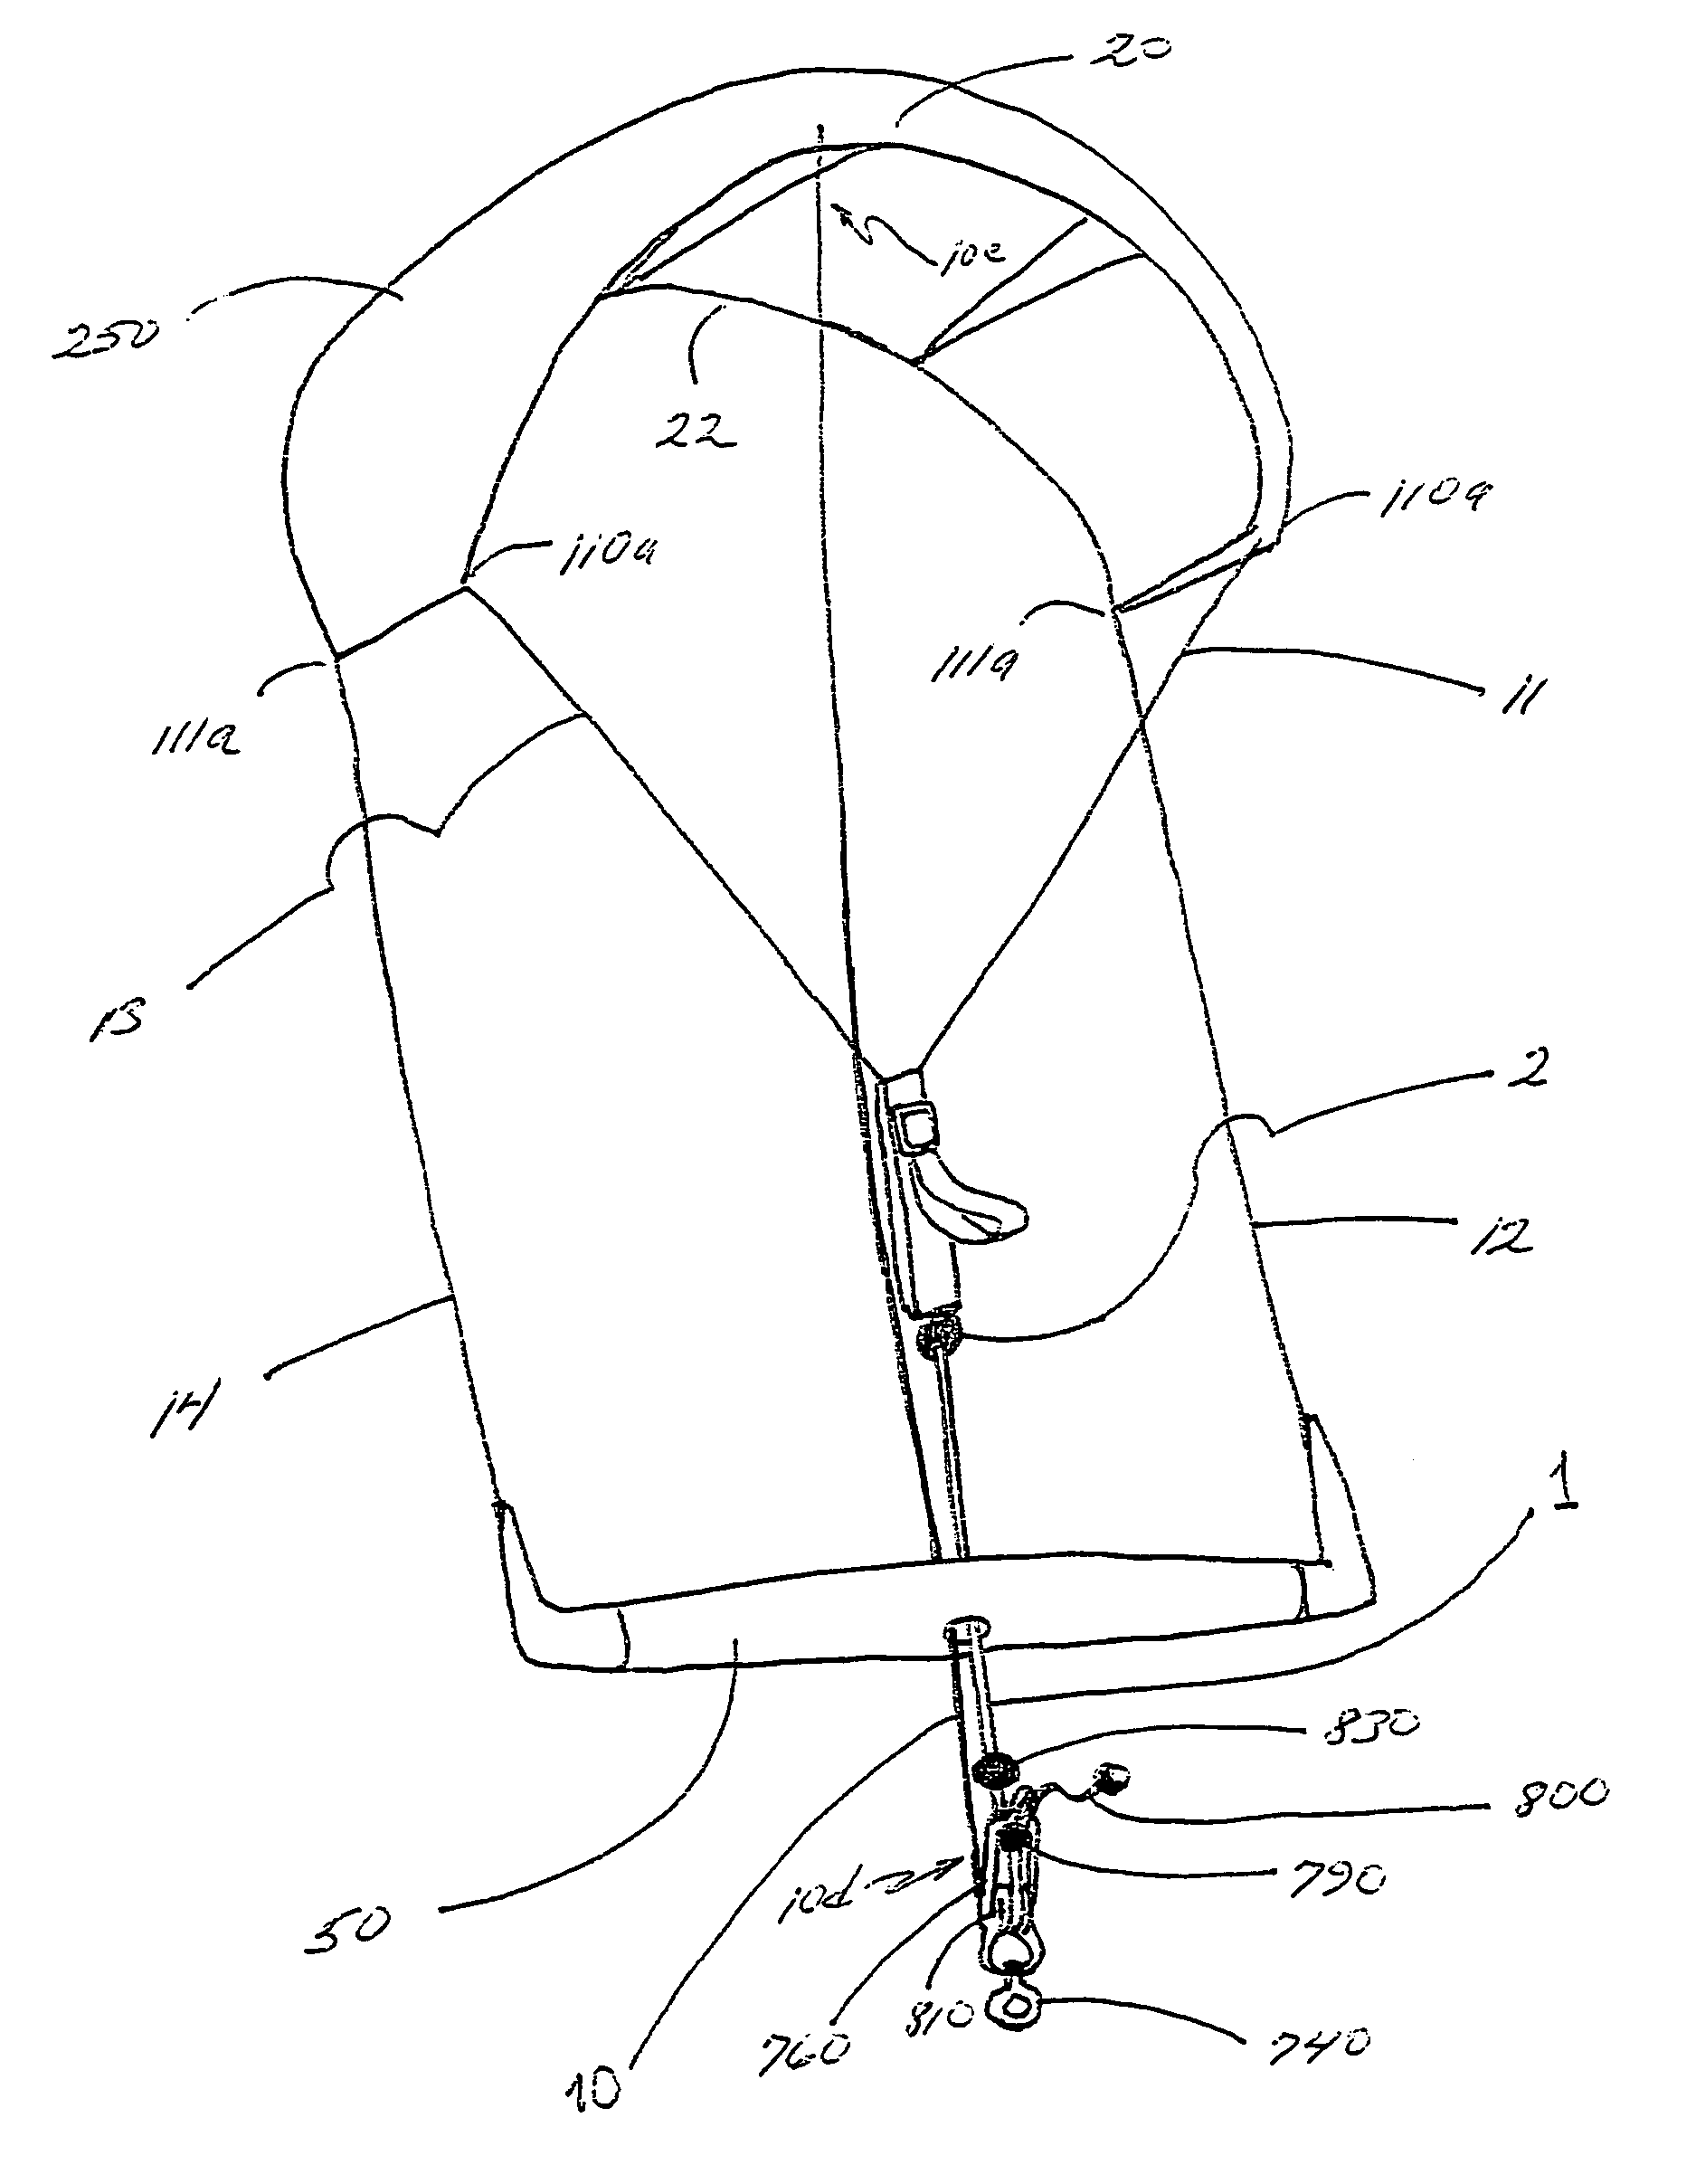 Kite safety, control, and rapid depowering apparatus